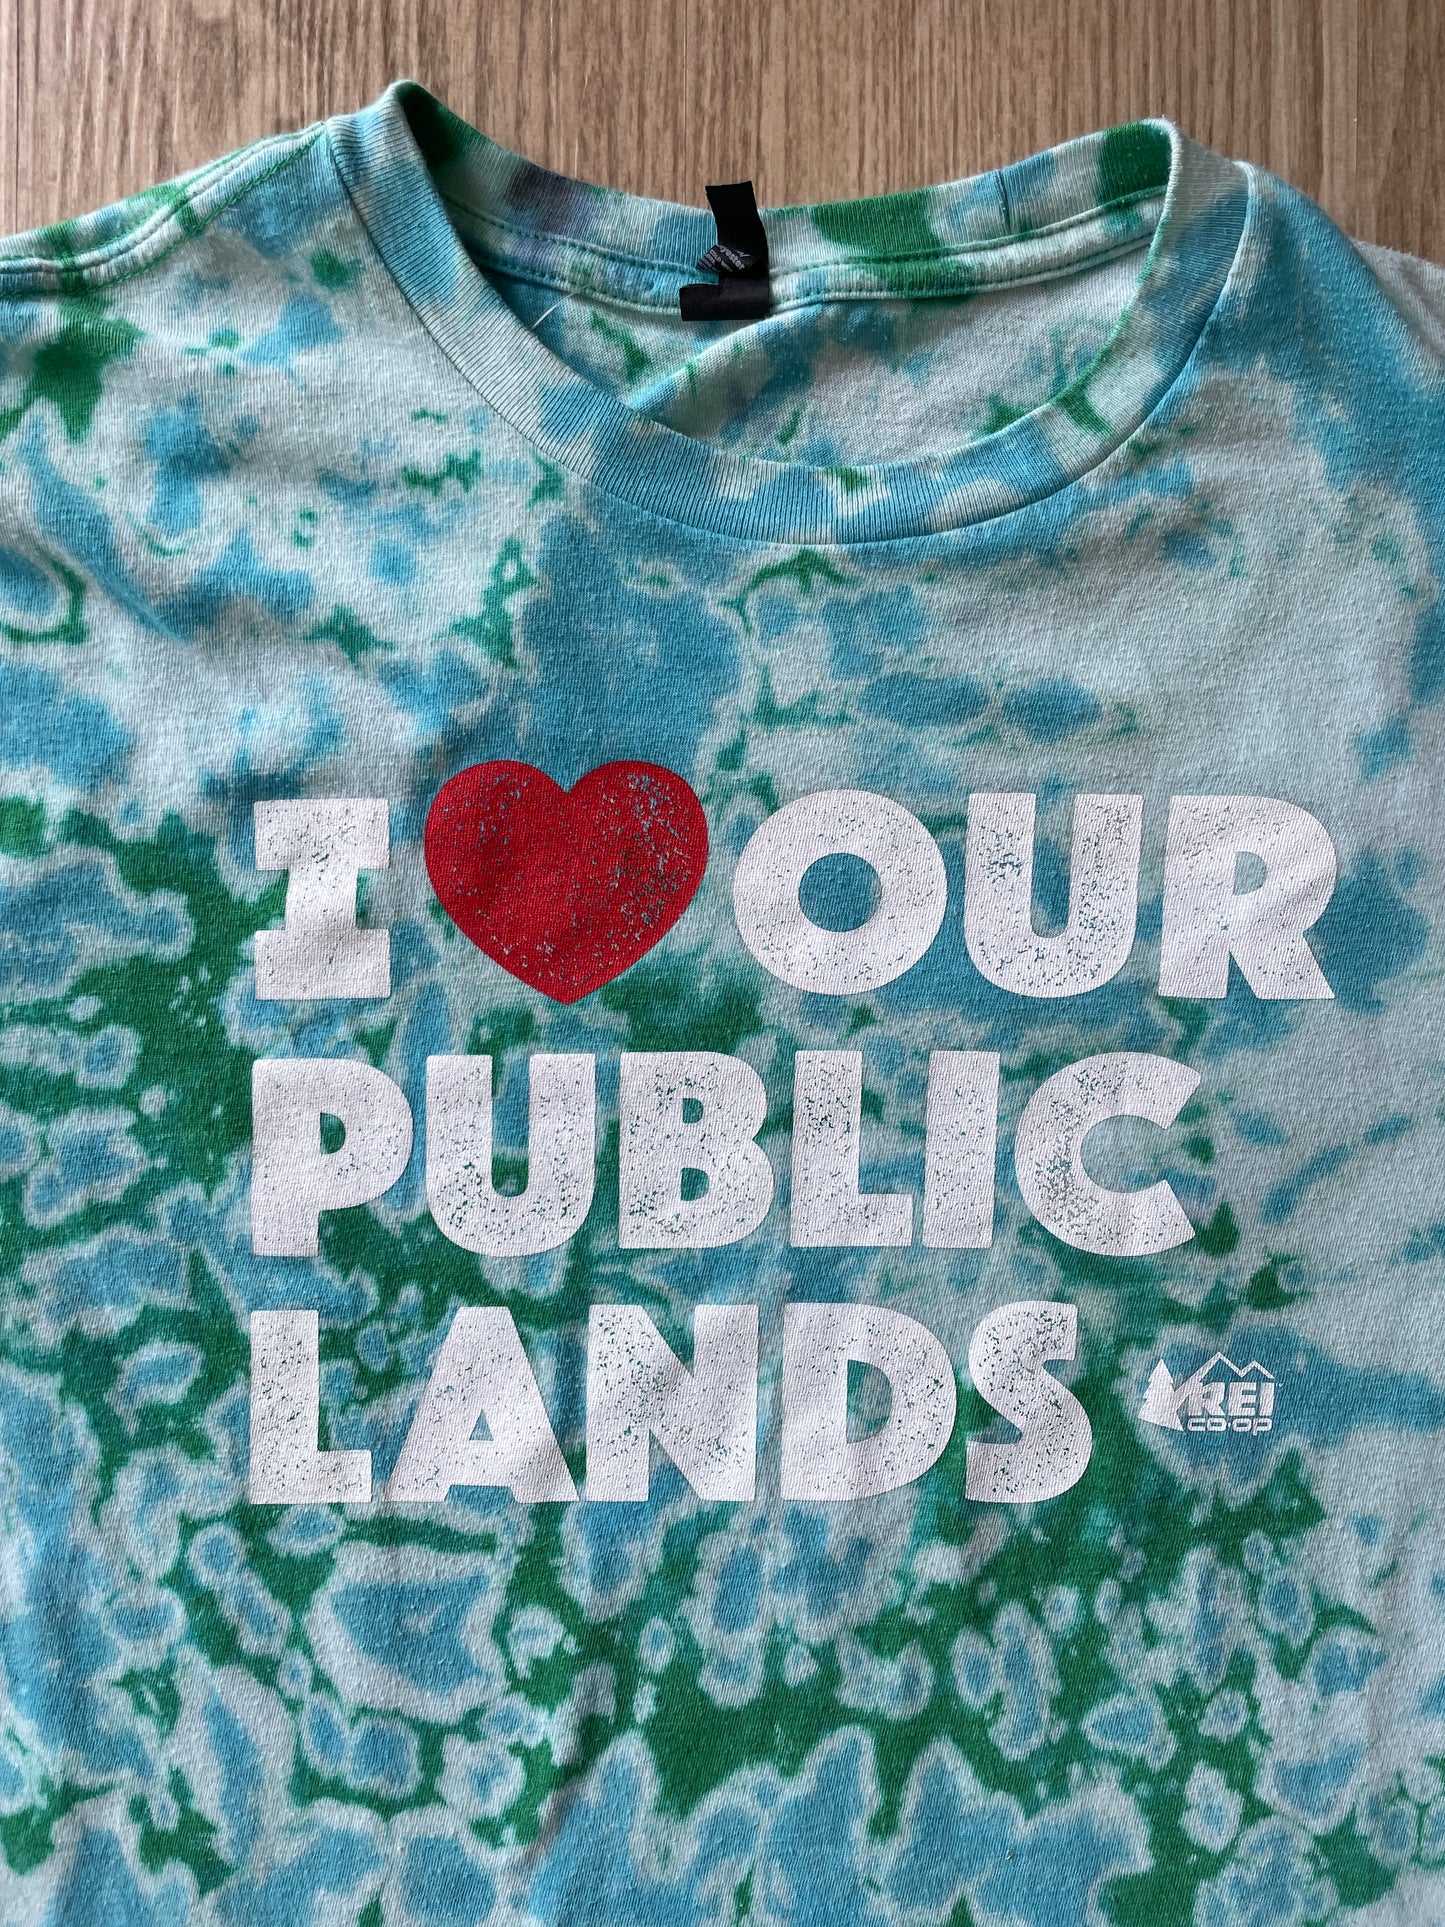 MEDIUM Men’s I Heart Our Public Lands Handmade Tie Dye T-Shirt | One-Of-a-Kind Green and White Short Sleeve